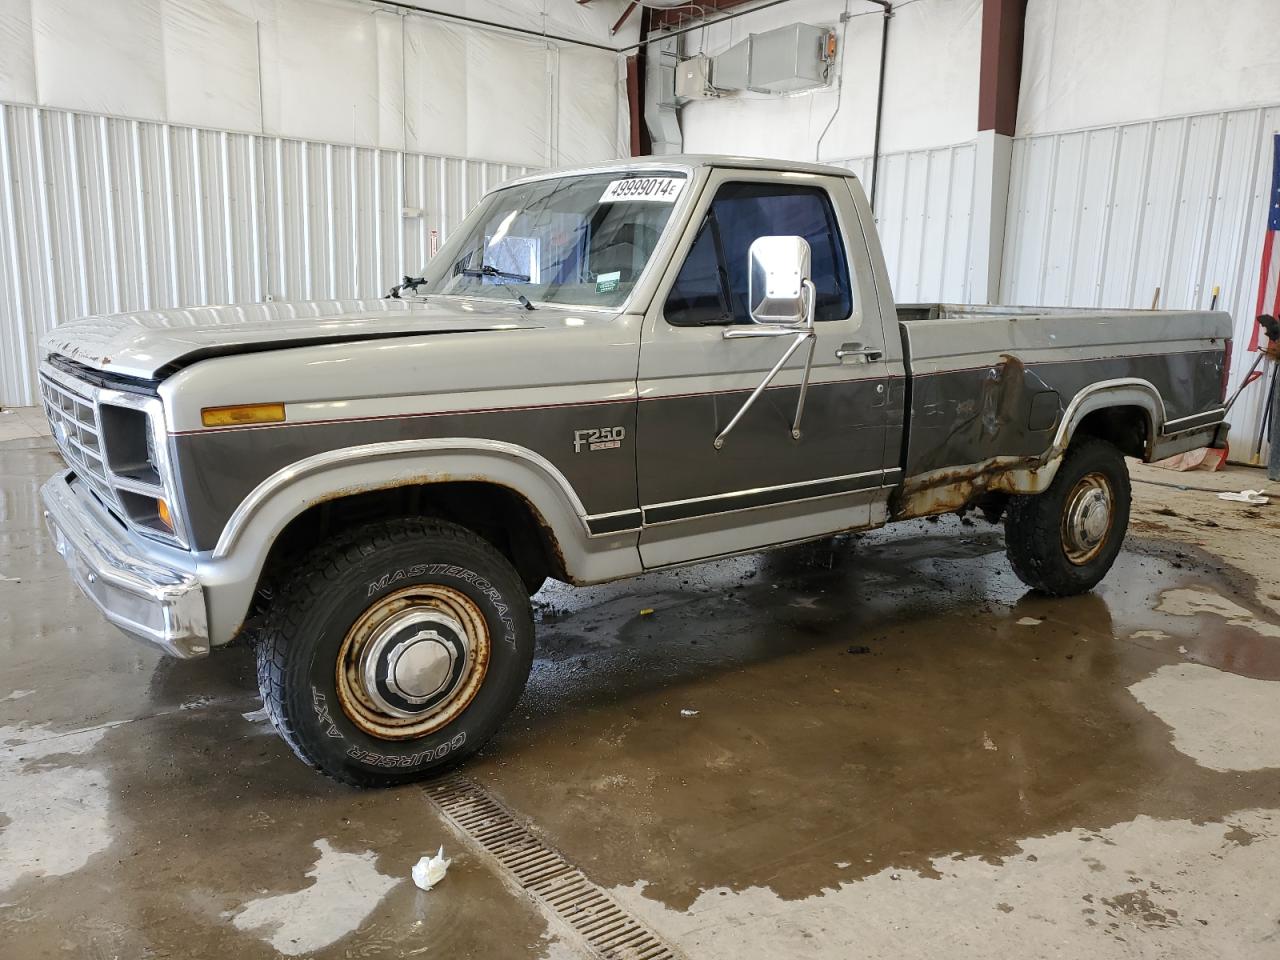 vin: 2FTEF25G7DCA38135 2FTEF25G7DCA38135 1983 ford f250 5800 for Sale in 53132, Wi - Milwaukee South, Franklin, Wisconsin, USA